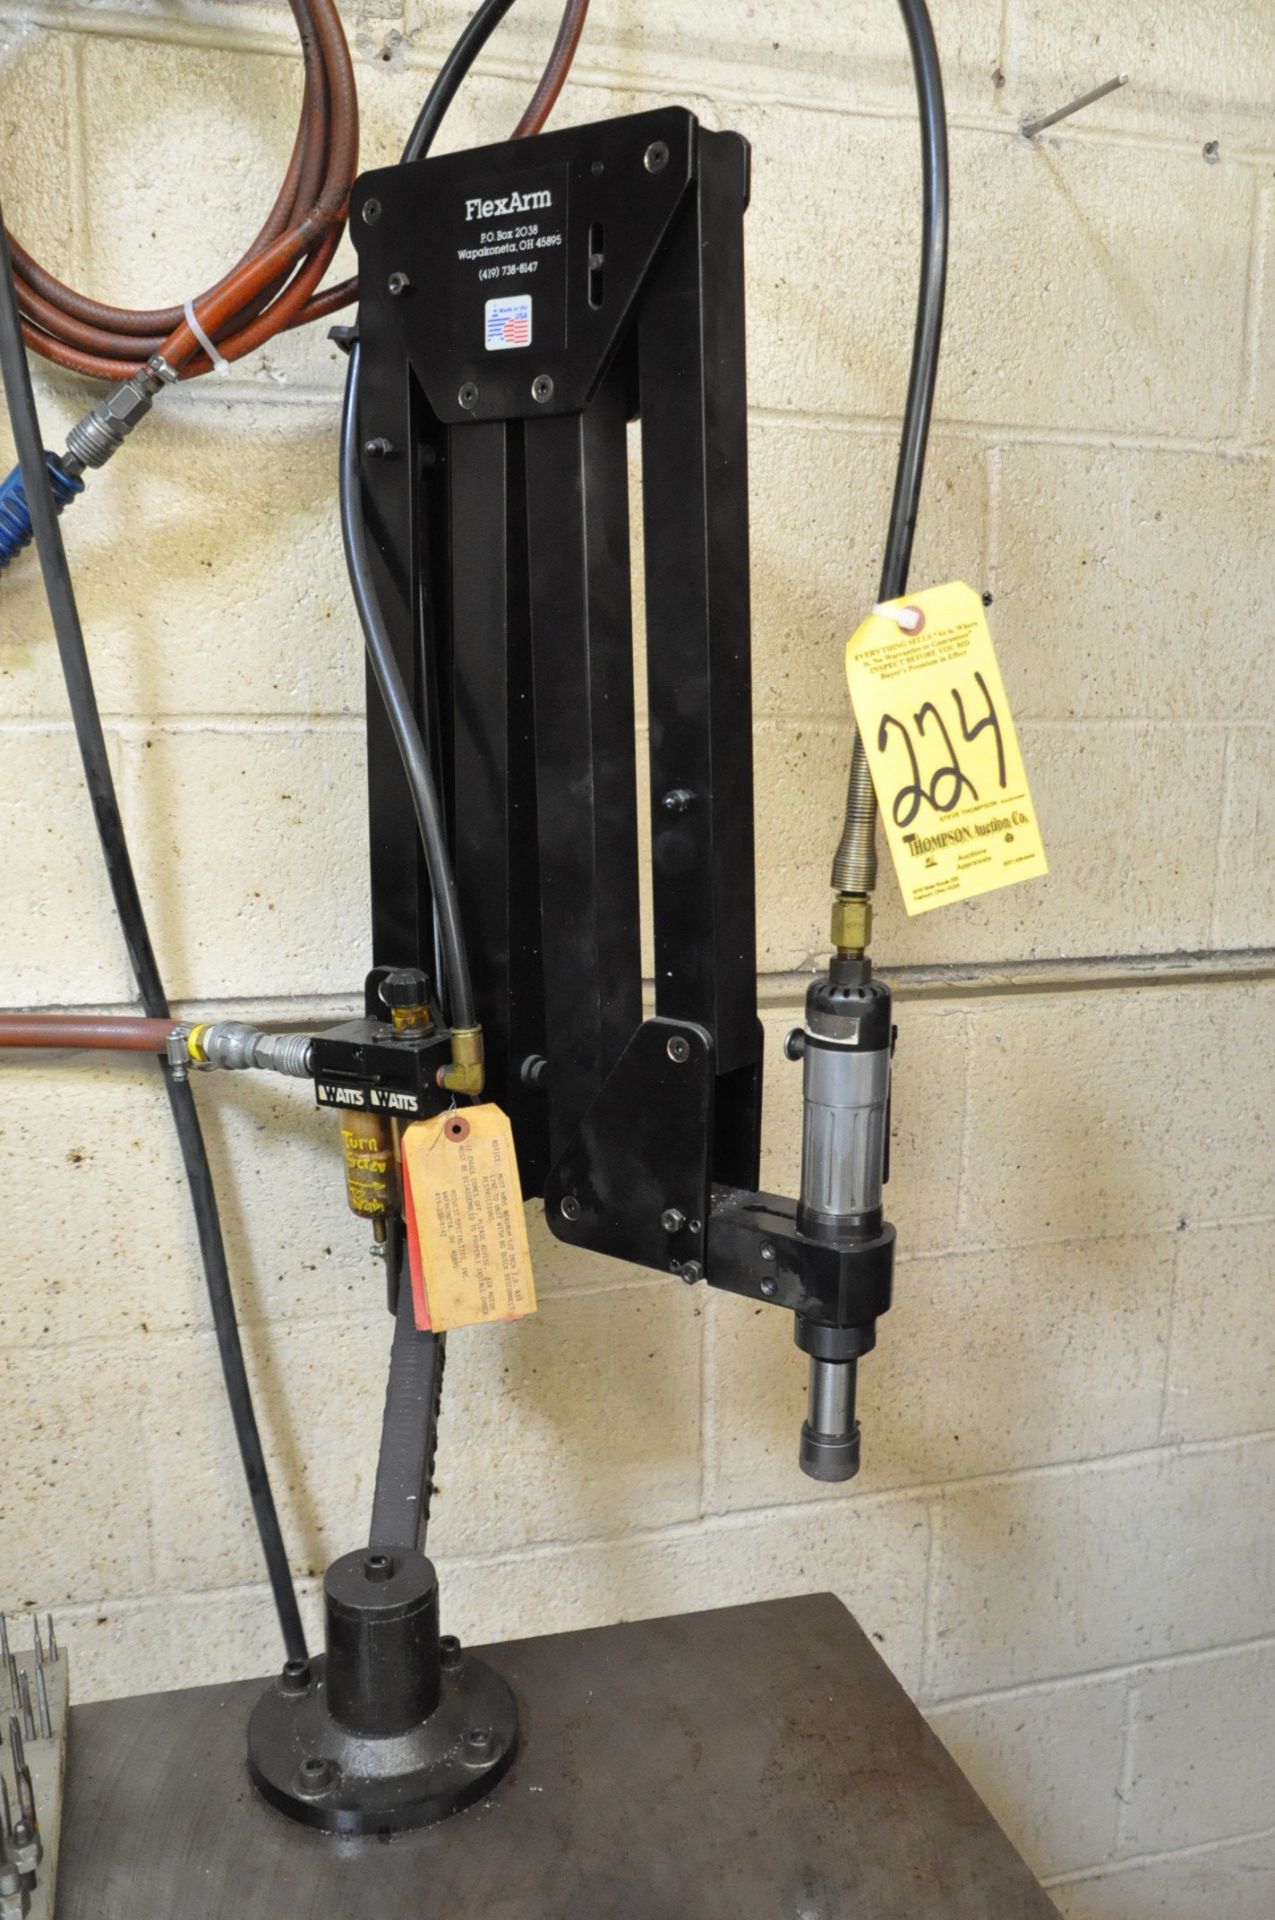 FlexArm Articulating Arm Pneumatic Tapping Station, S/n N/a, Mounted on 22" x 38" x 1" Steel Top - Image 2 of 3